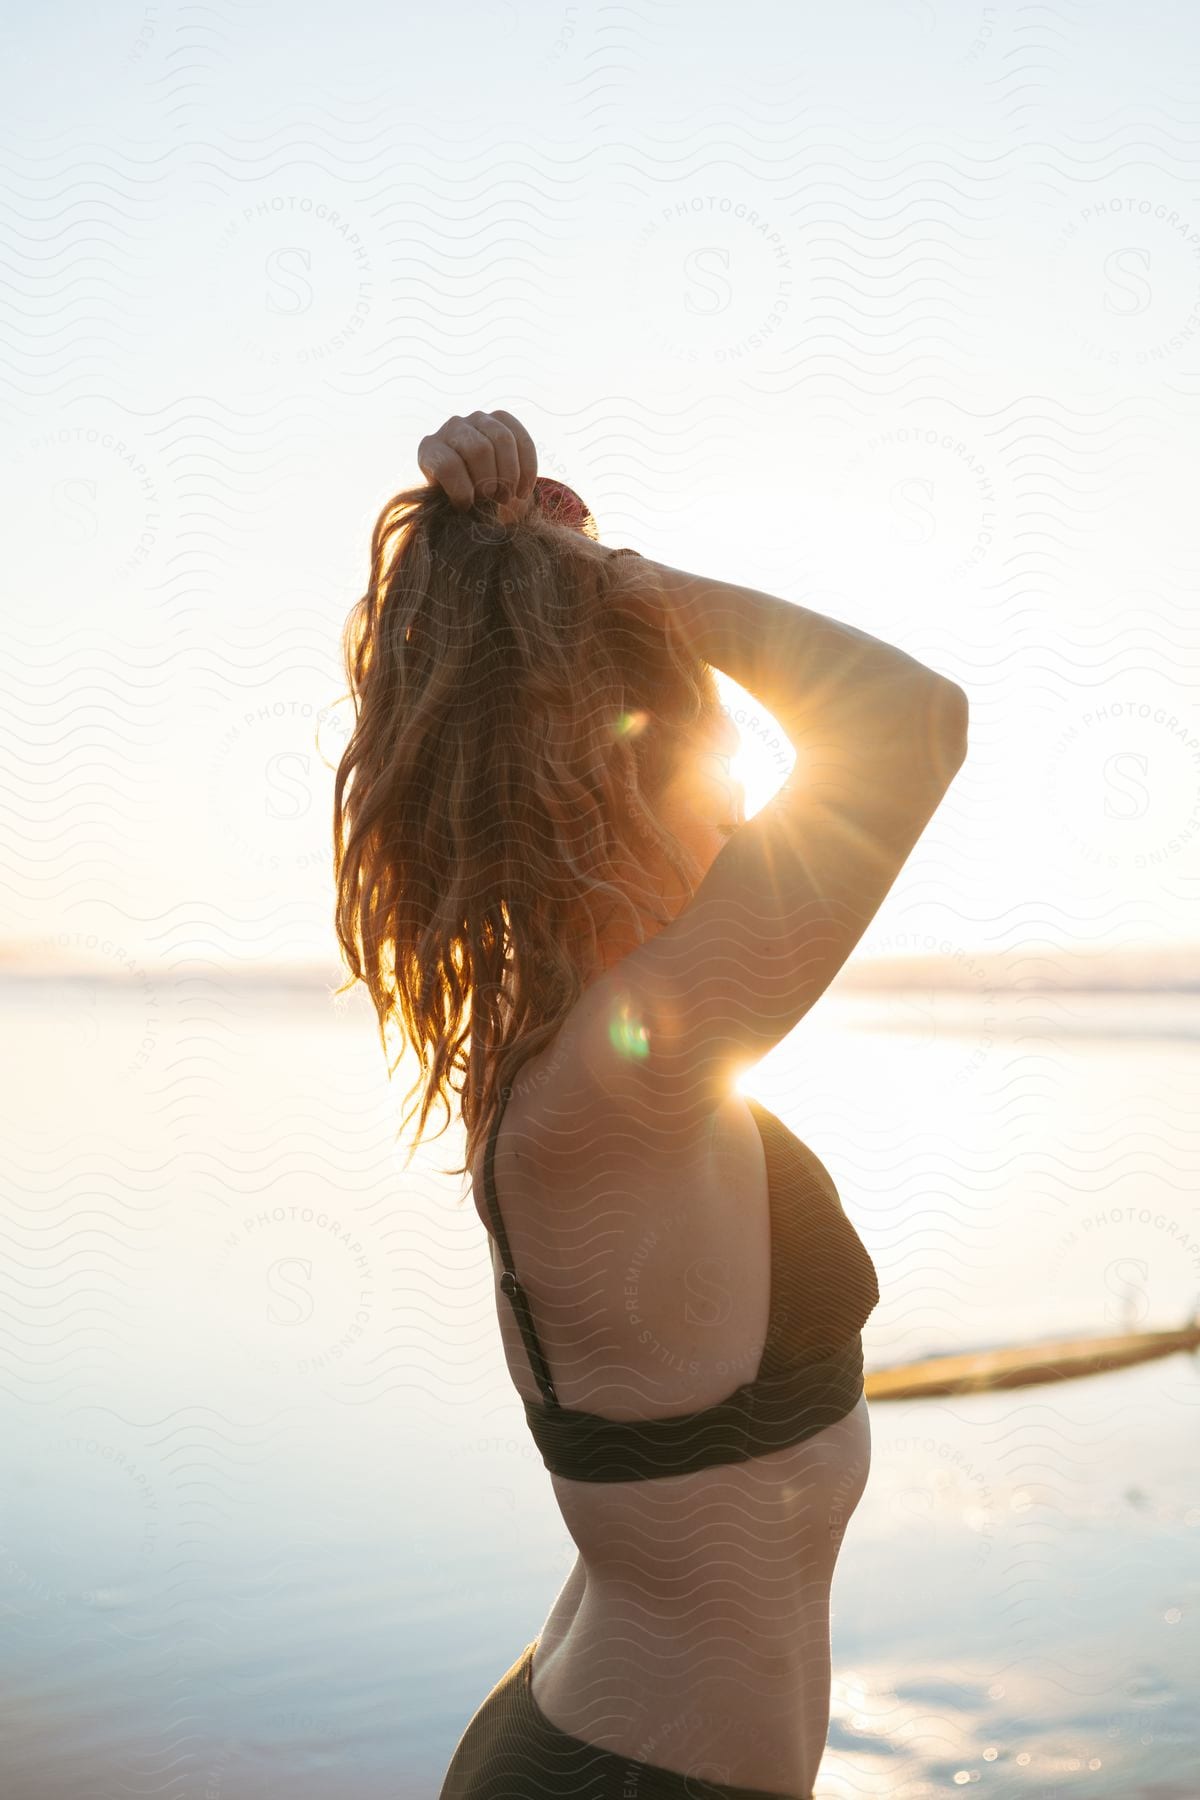 A woman in a bikini standing above the water with arms up and hands in her hair as the setting sun shines on her